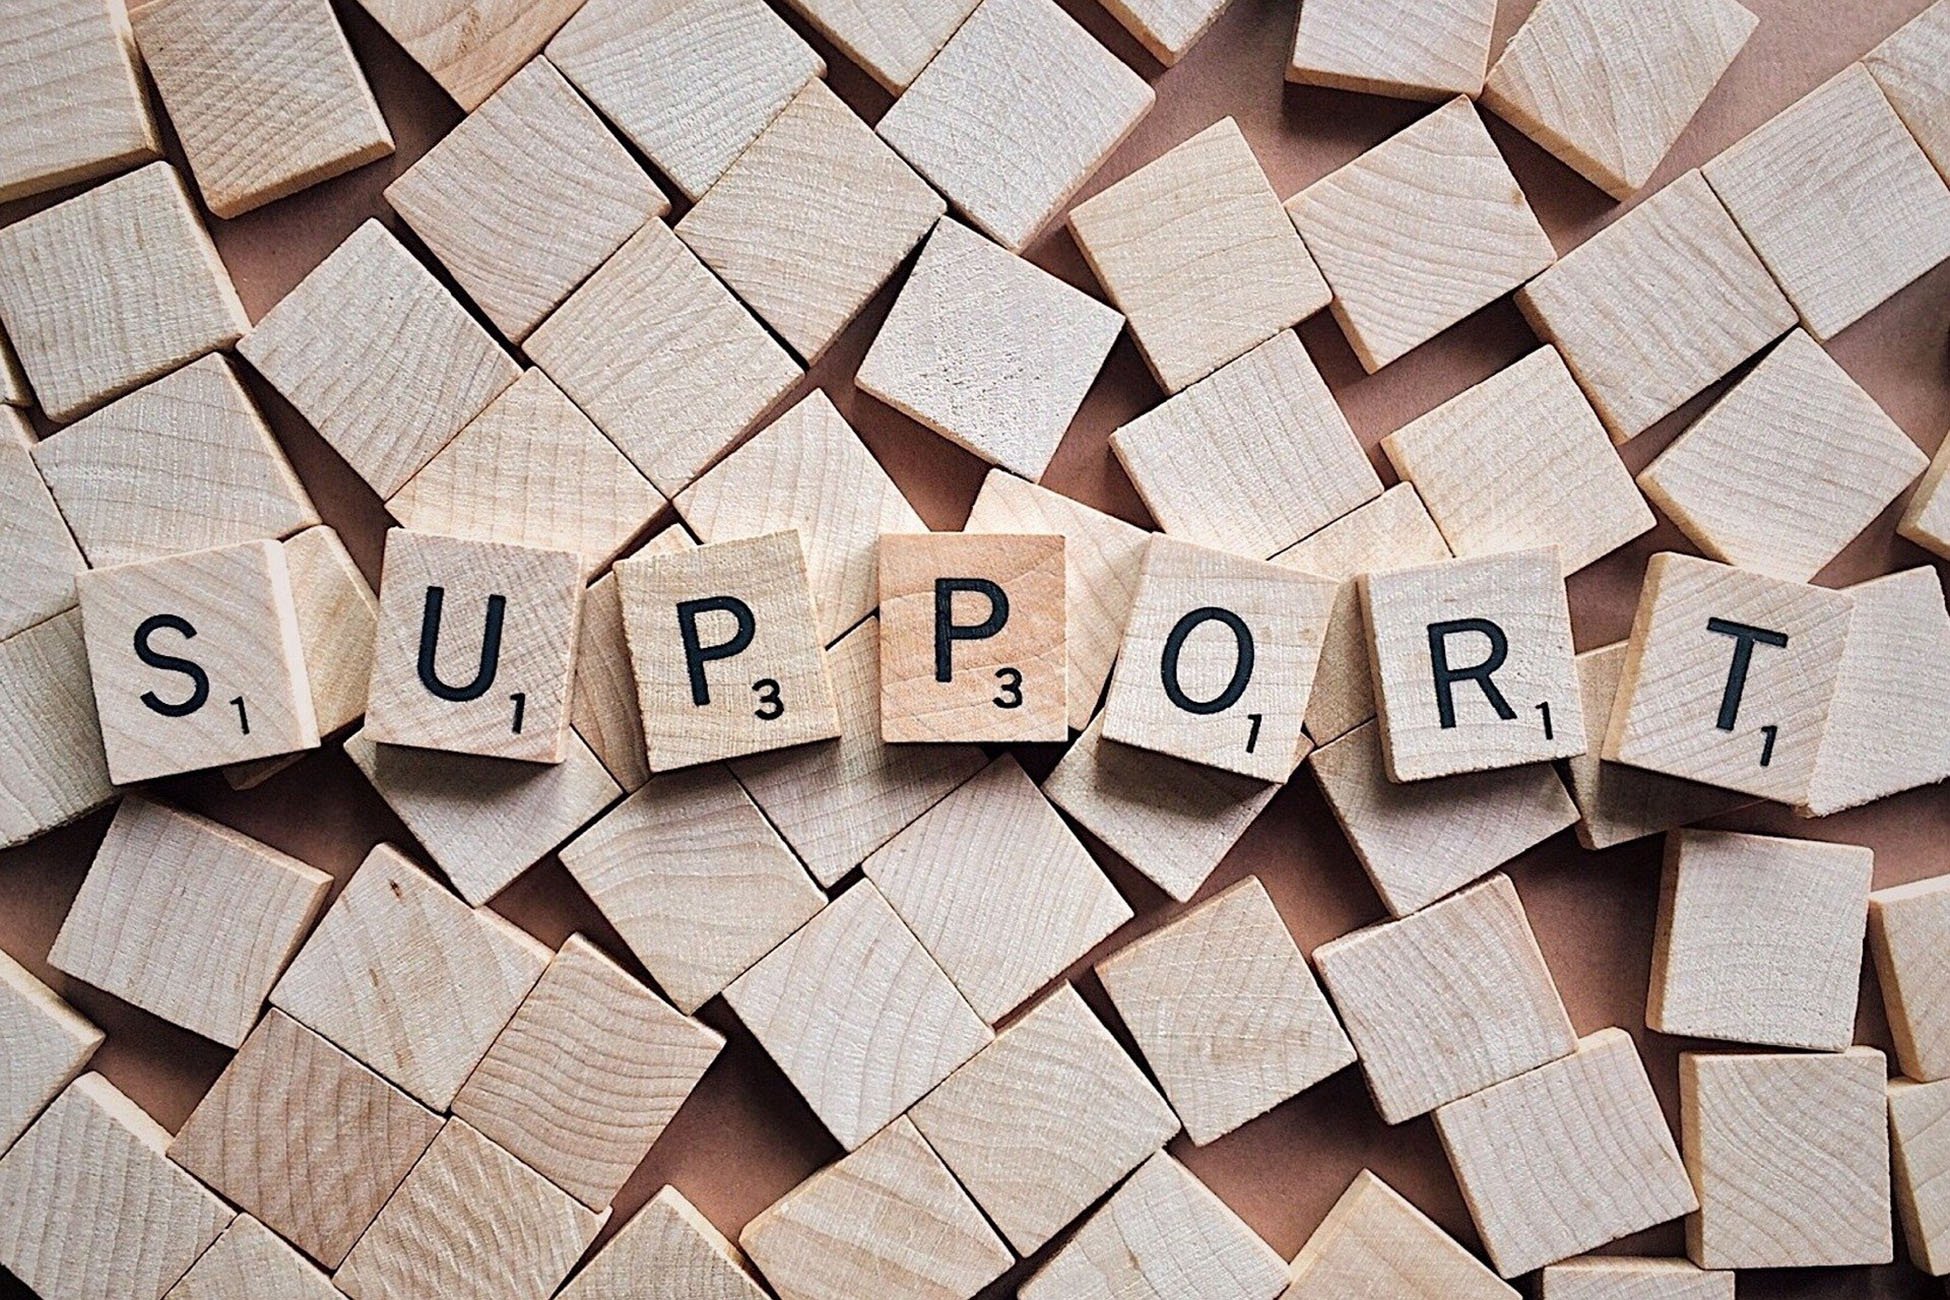 "Support" spelled out on Scrabble tiles